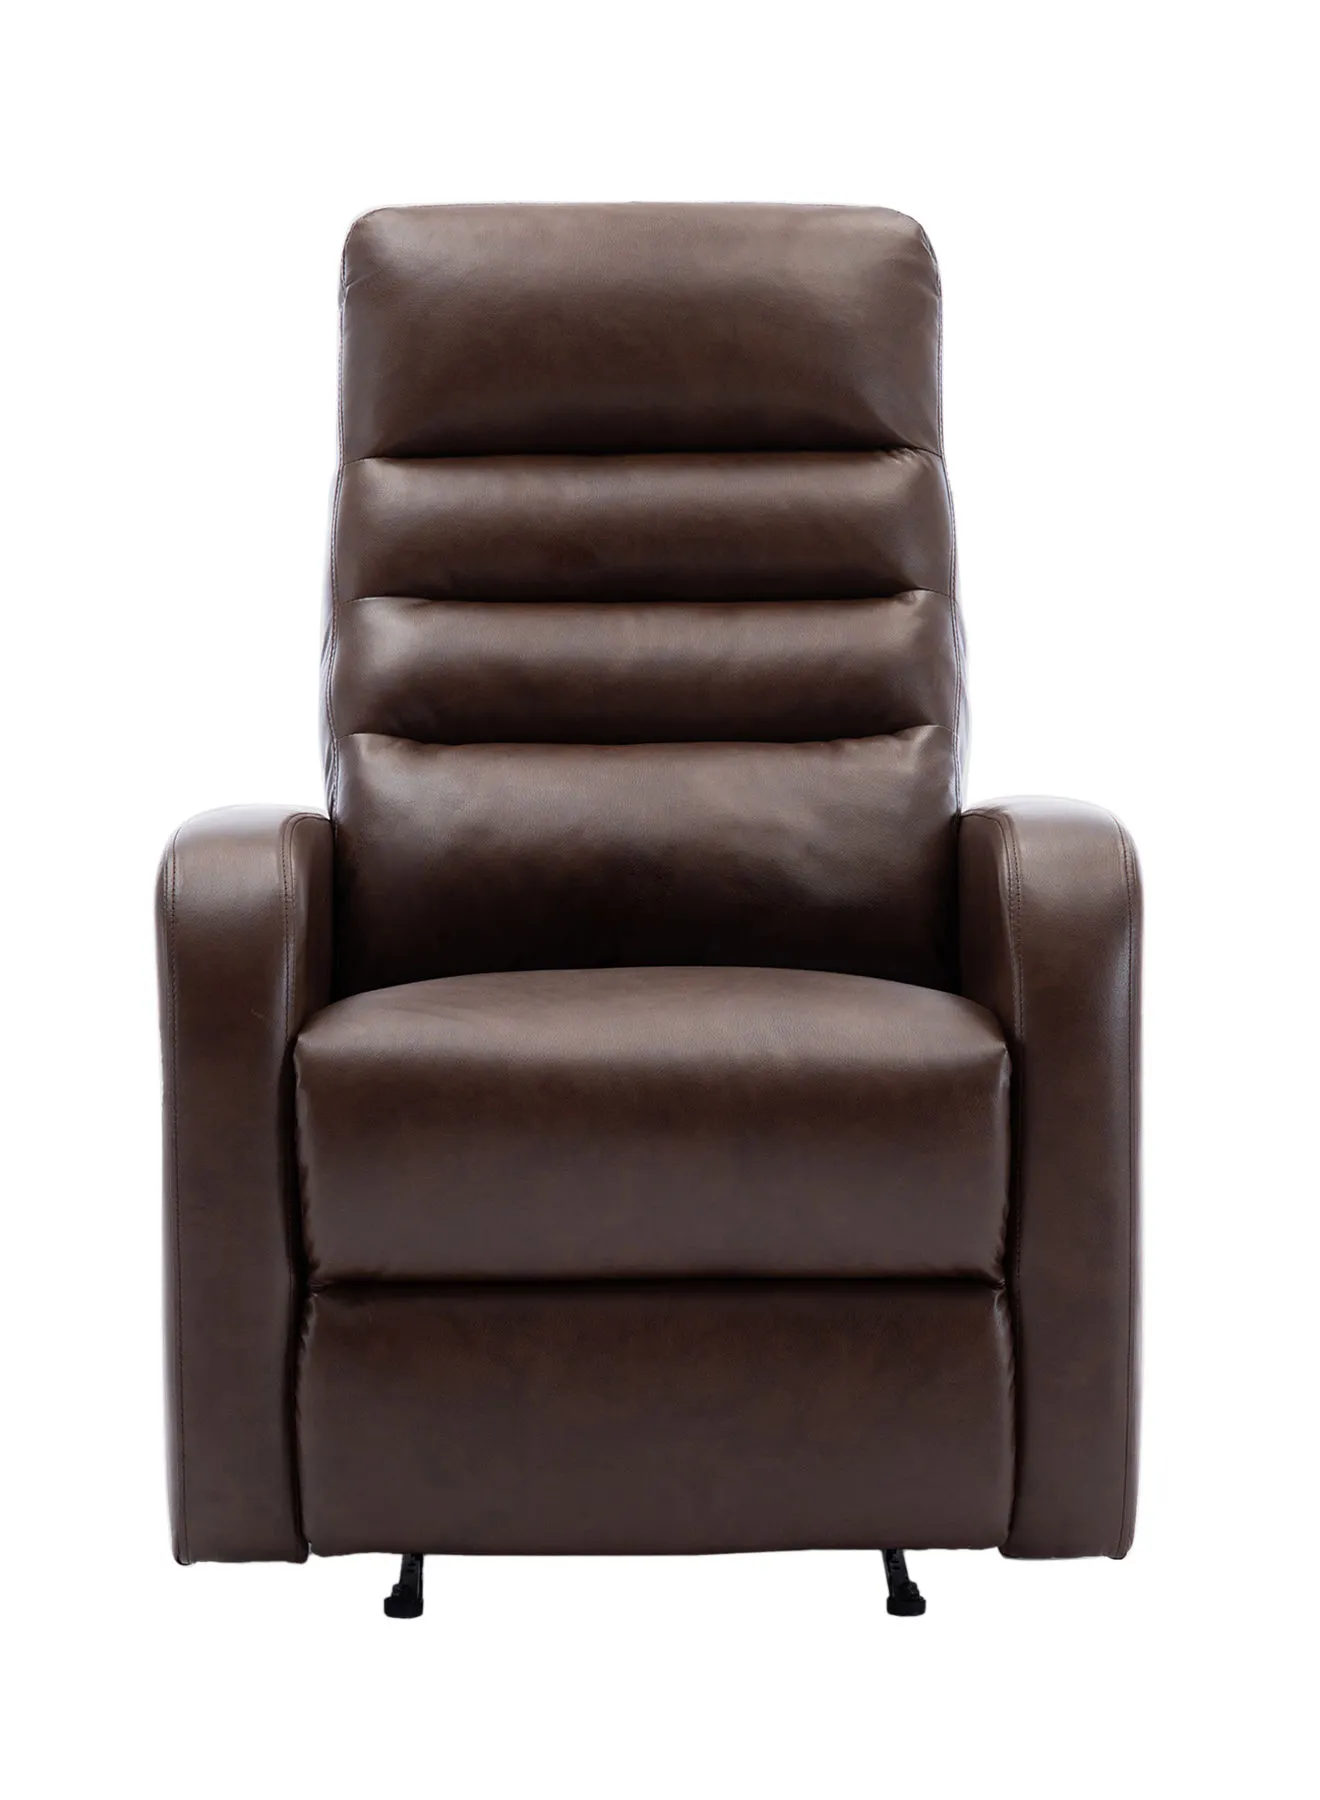 ebb & flow Recliner Sofa Luxurious Brown Leather Dawson Collection Classic Lazy Boy Chair 79 X 98 X 102 Relaxing Sofa, Easy Chair